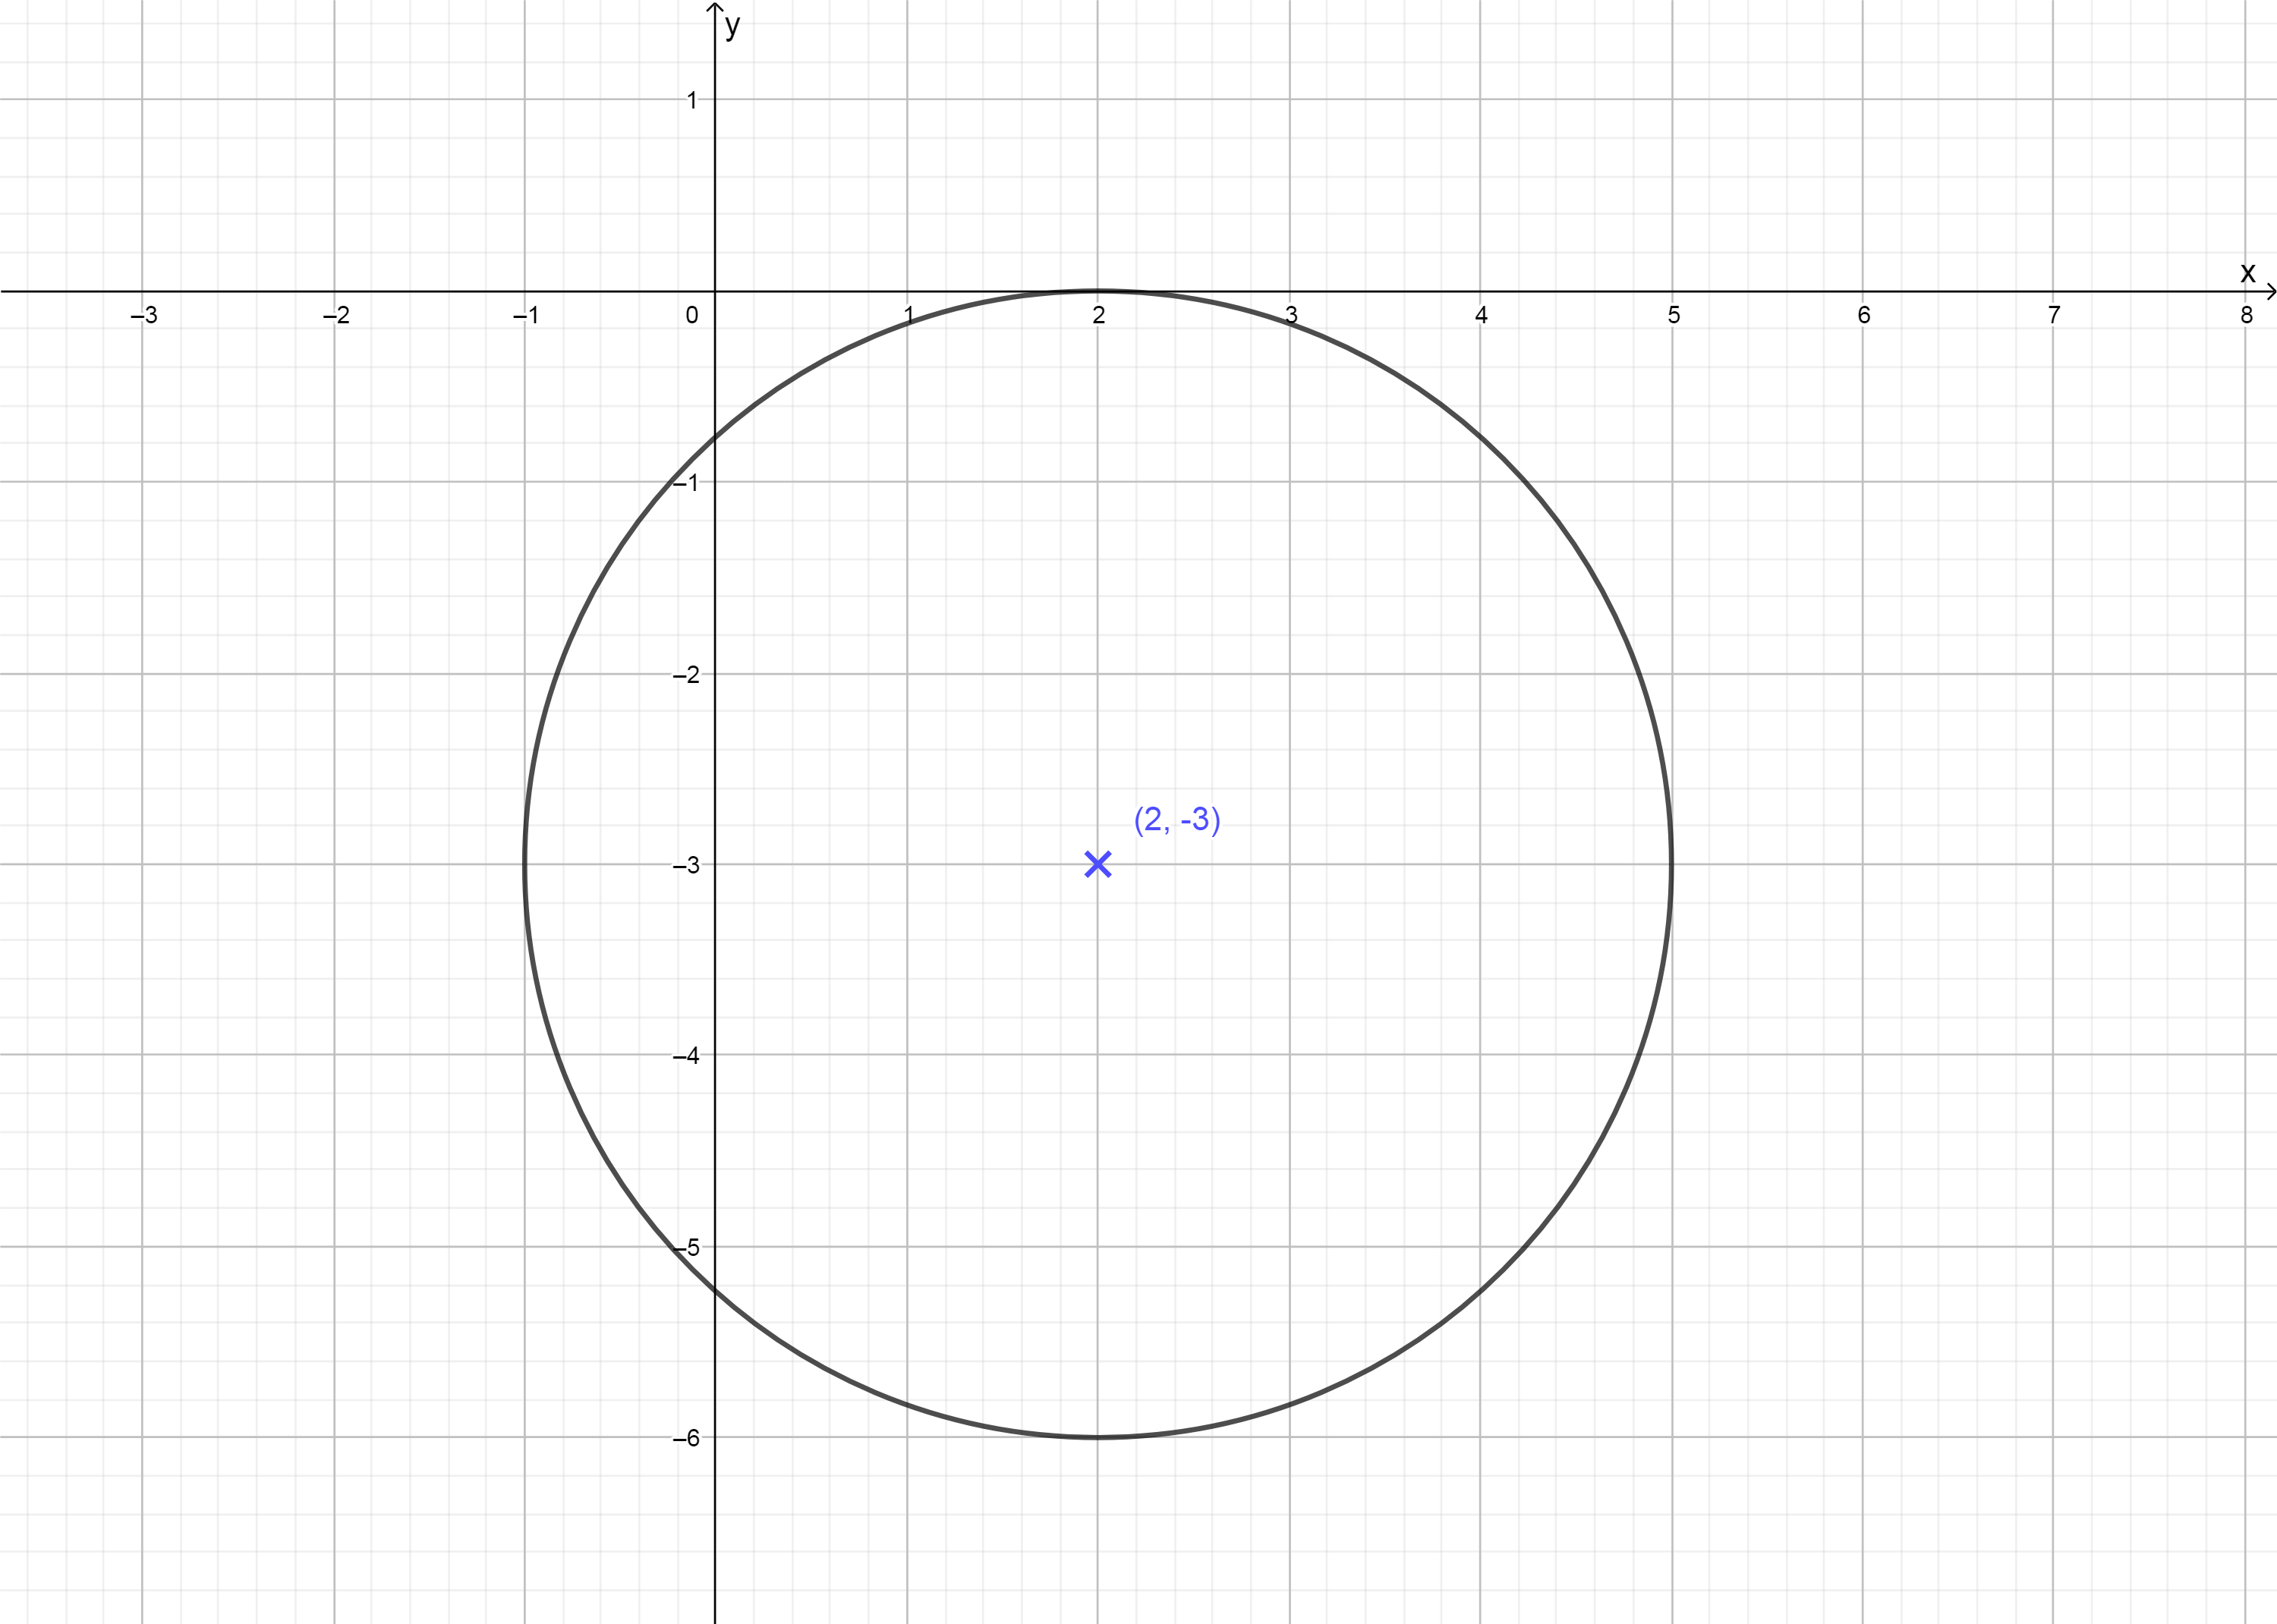 The graph of the circle centered at (2,-3) with radius 3